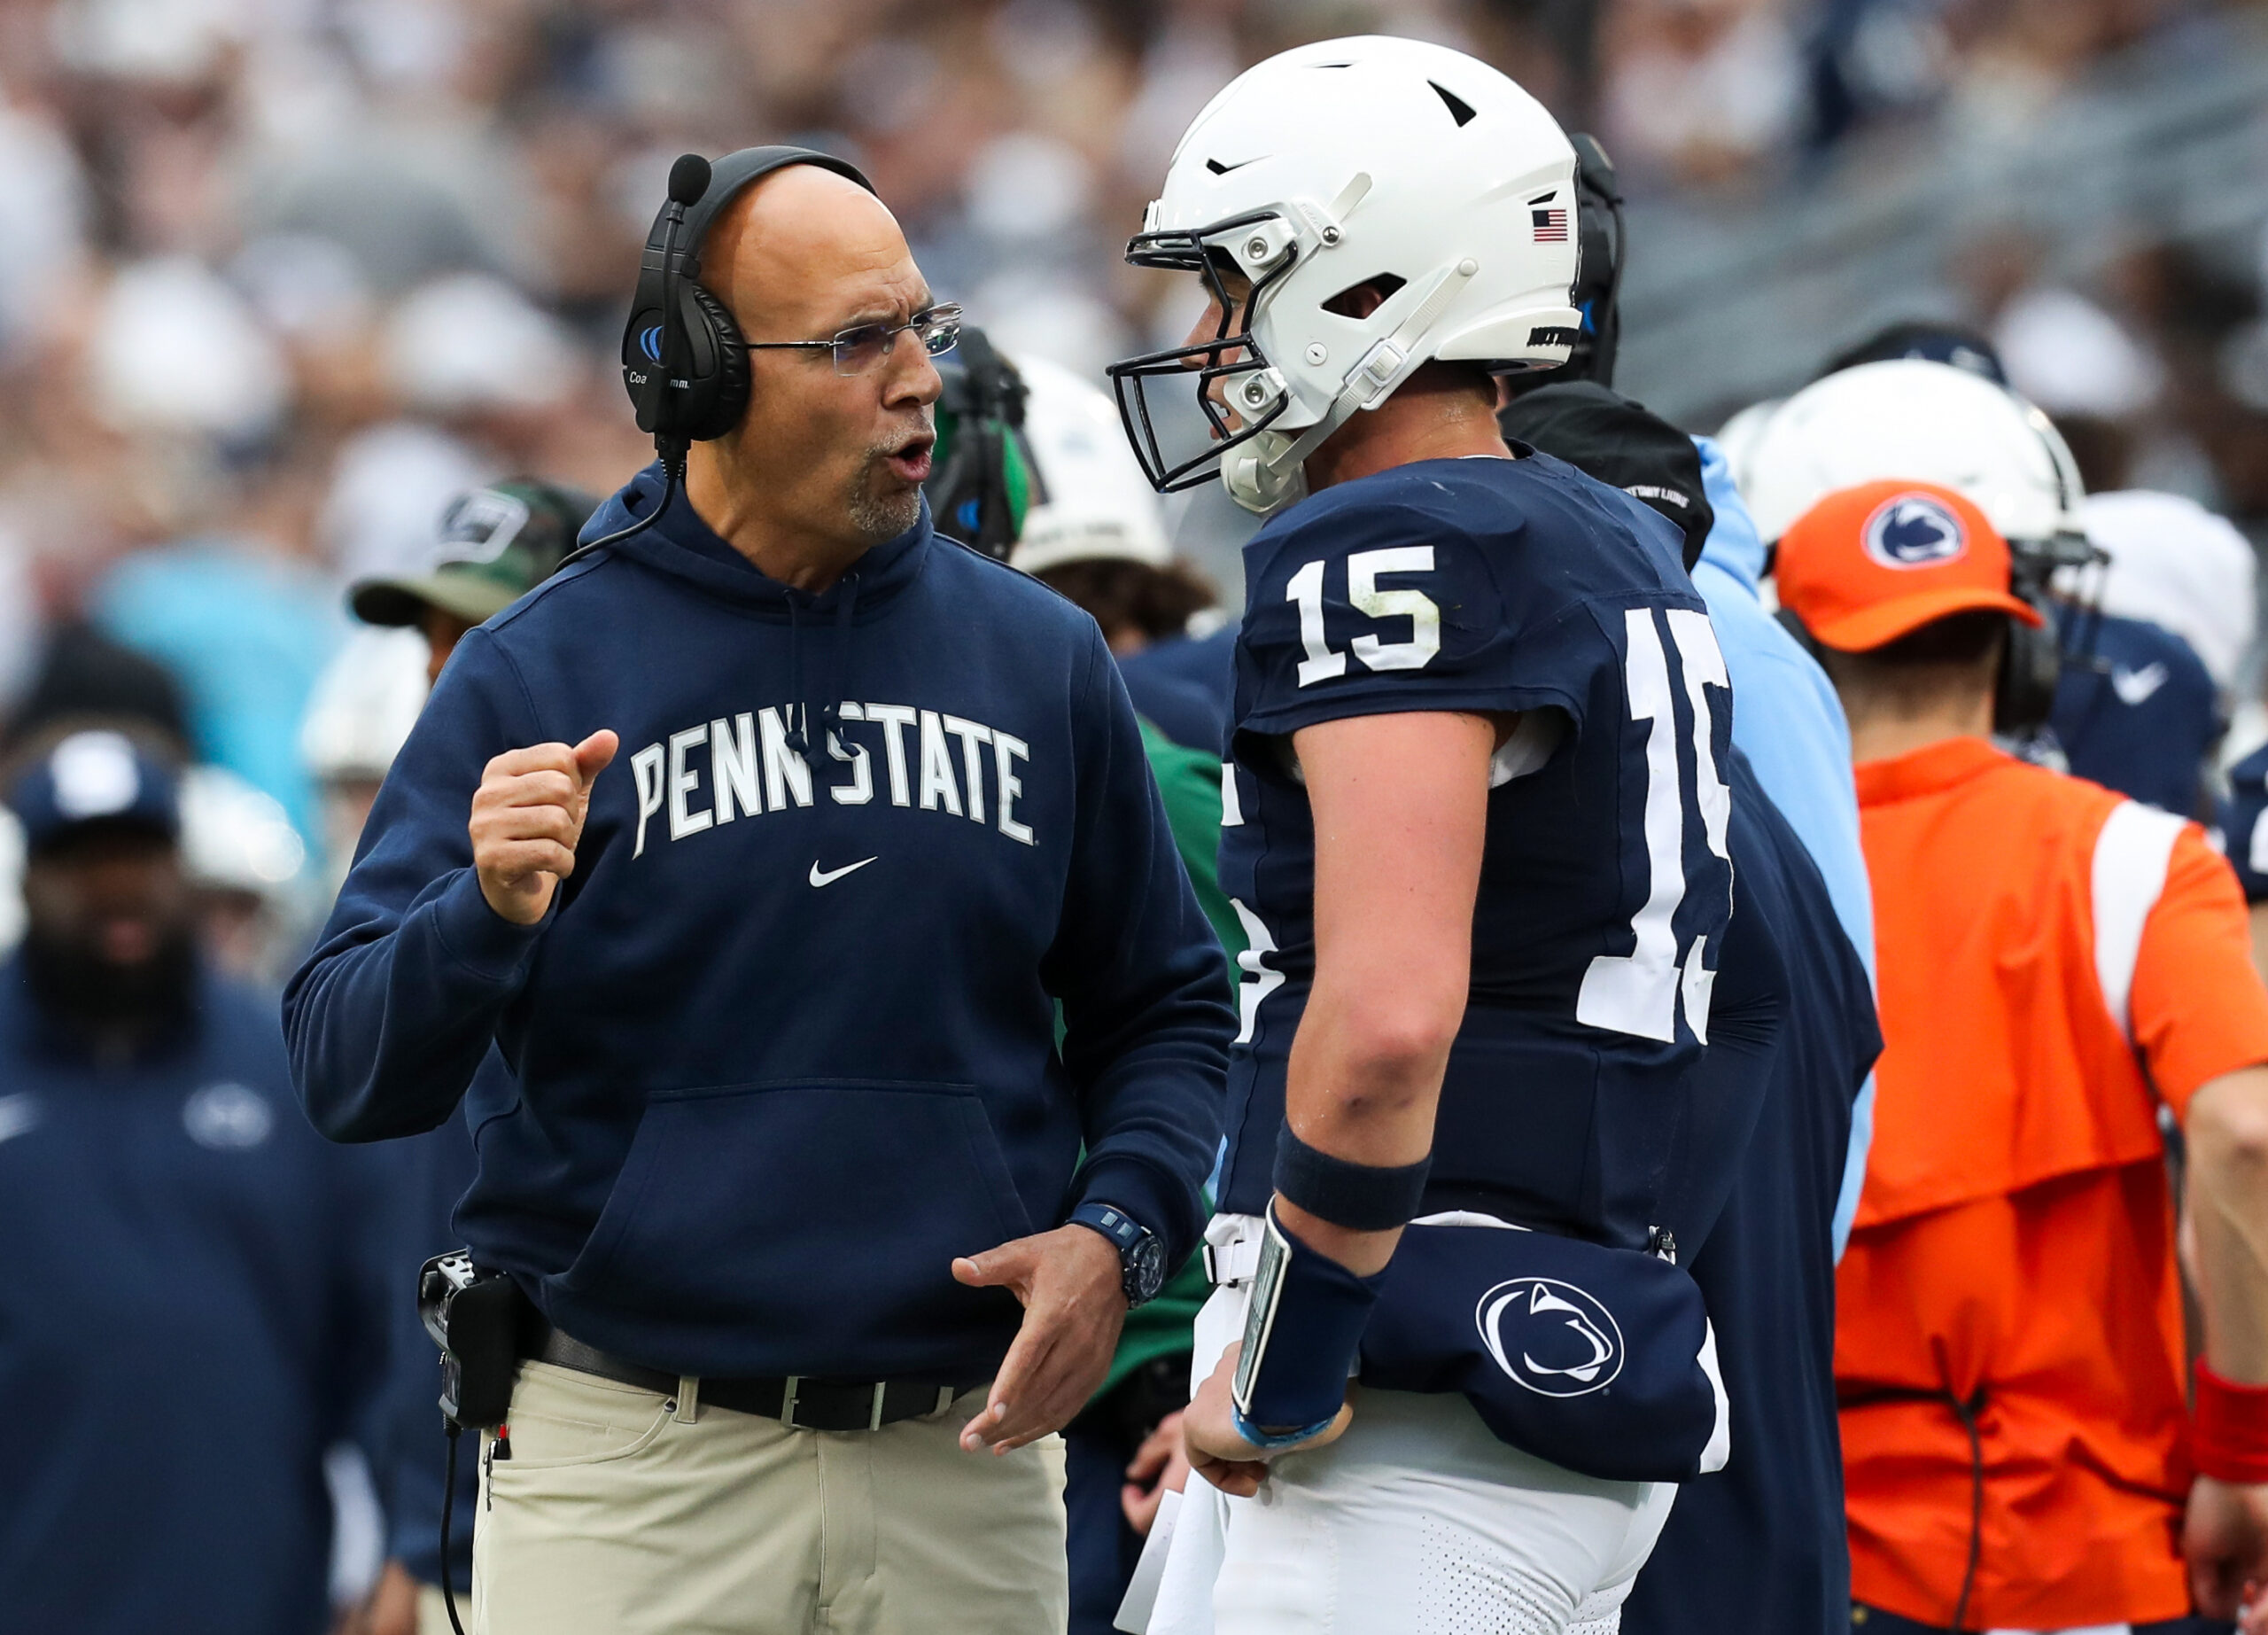 Penn State football team has a problem with its passing offense [opinion]